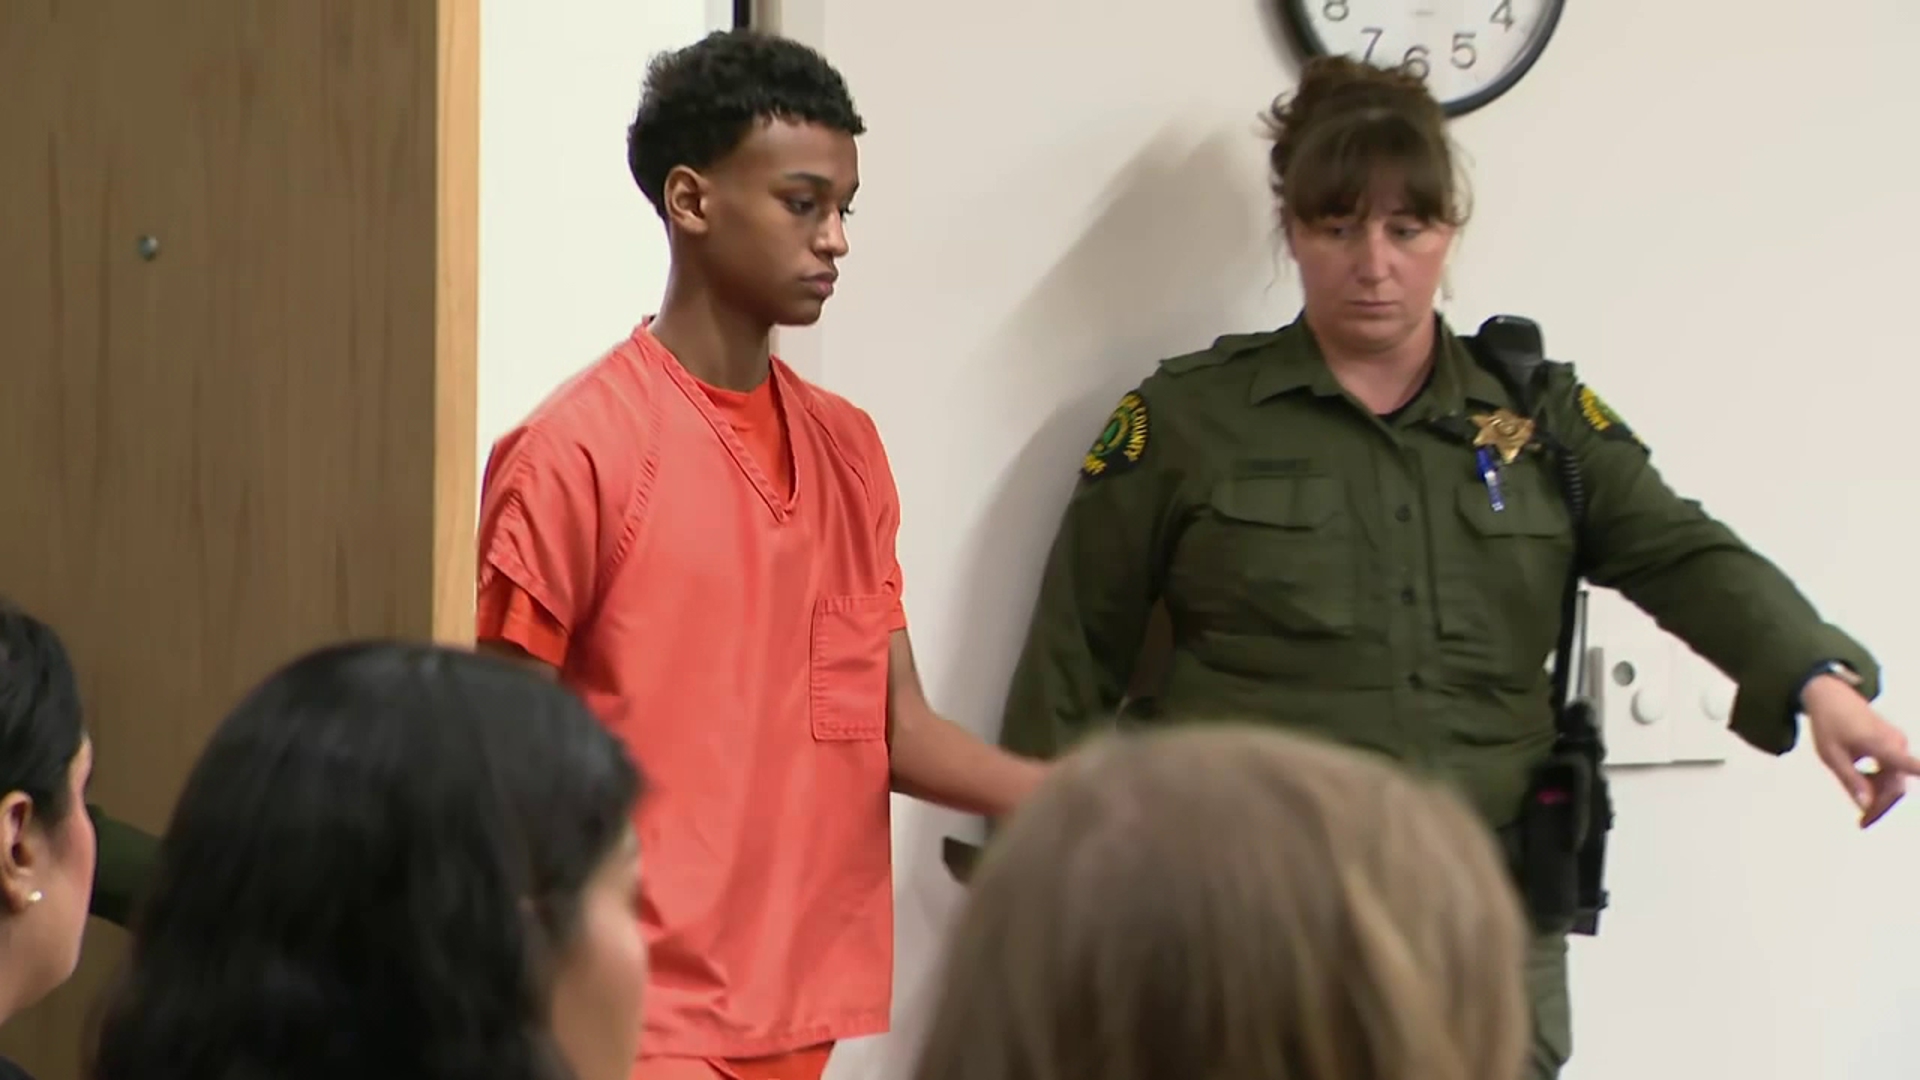 The 16-year-old suspect, Samuel Gizaw, pleaded not guilty.